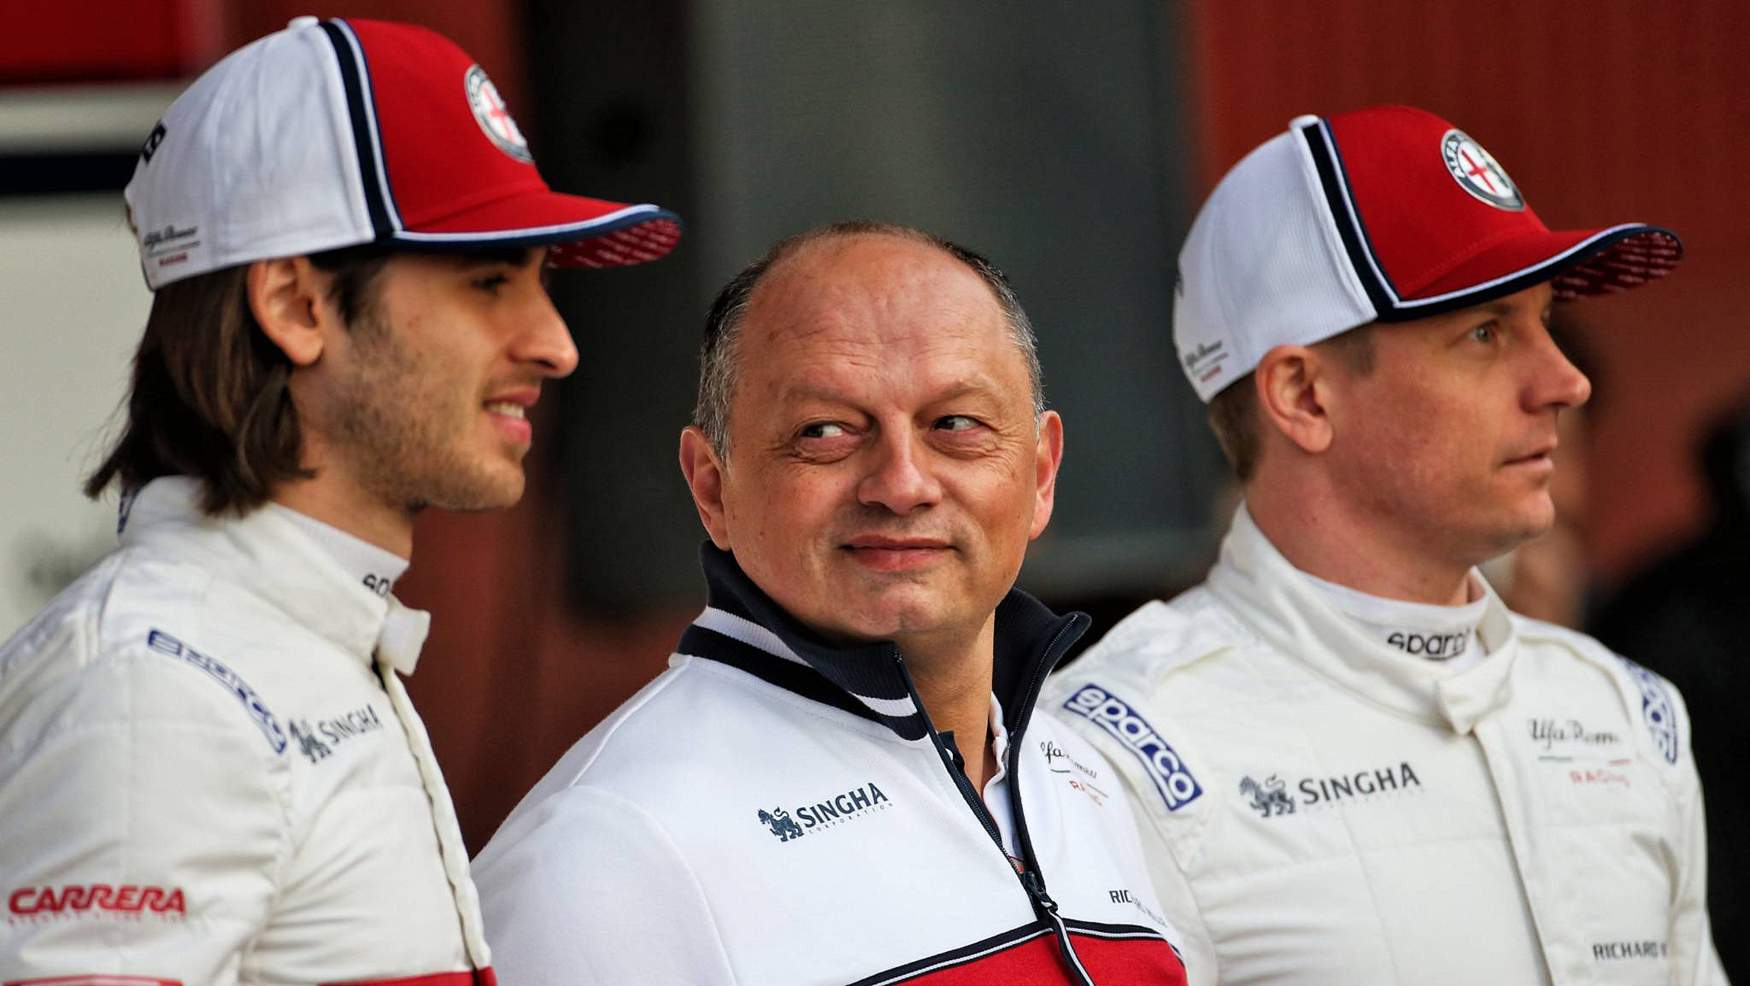 Vasseur to remain as Alfa Romeo team boss, no decision yet on 2022 driver lineup